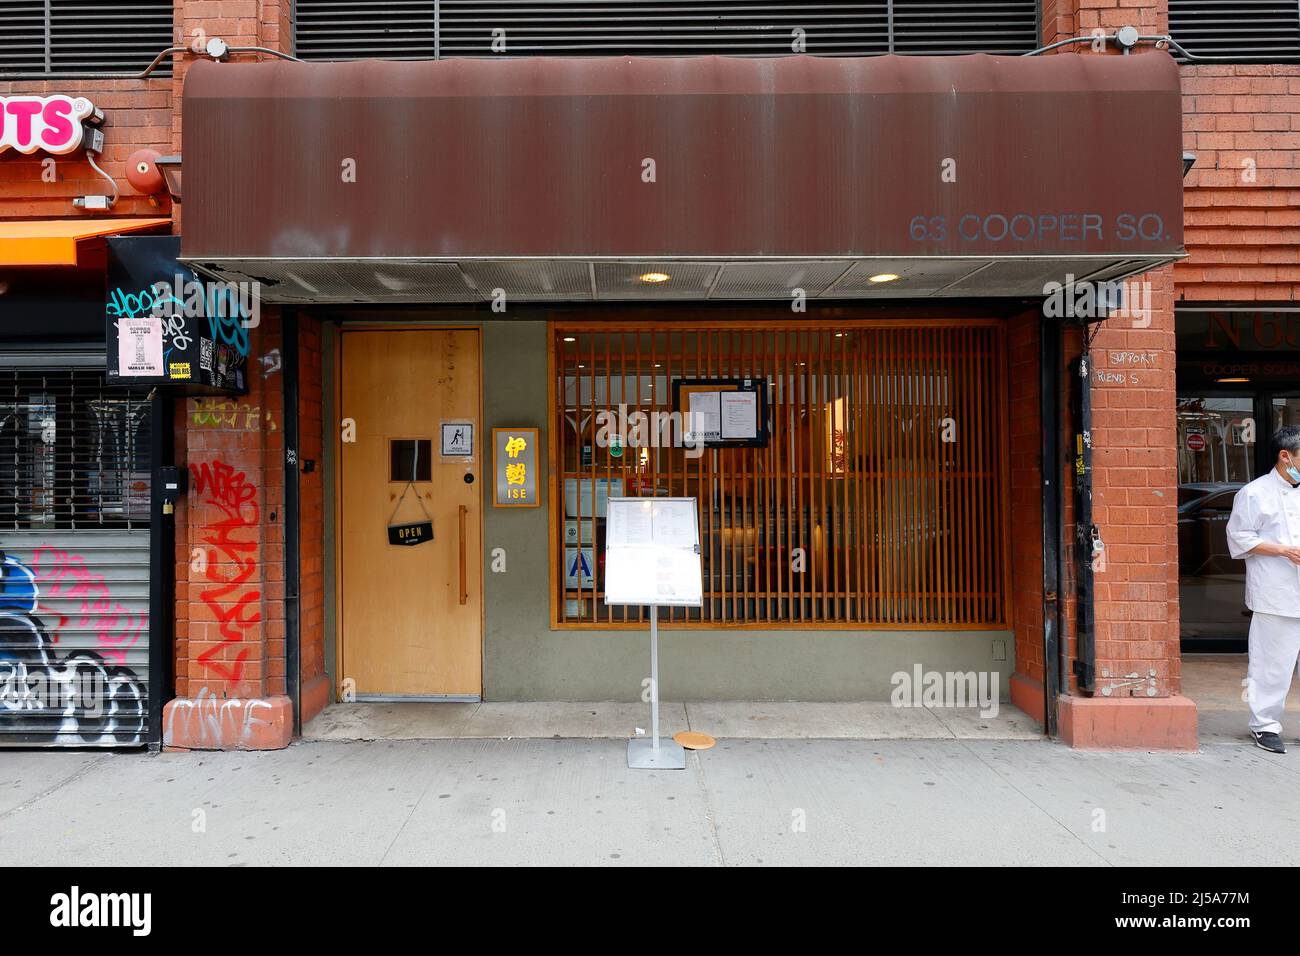 Ise, 63 Cooper Sq, New York, NYC storefront photo of a sushi, and soba noodle Japanese restaurant in the East Village neighborhood in Manhattan Stock Photo